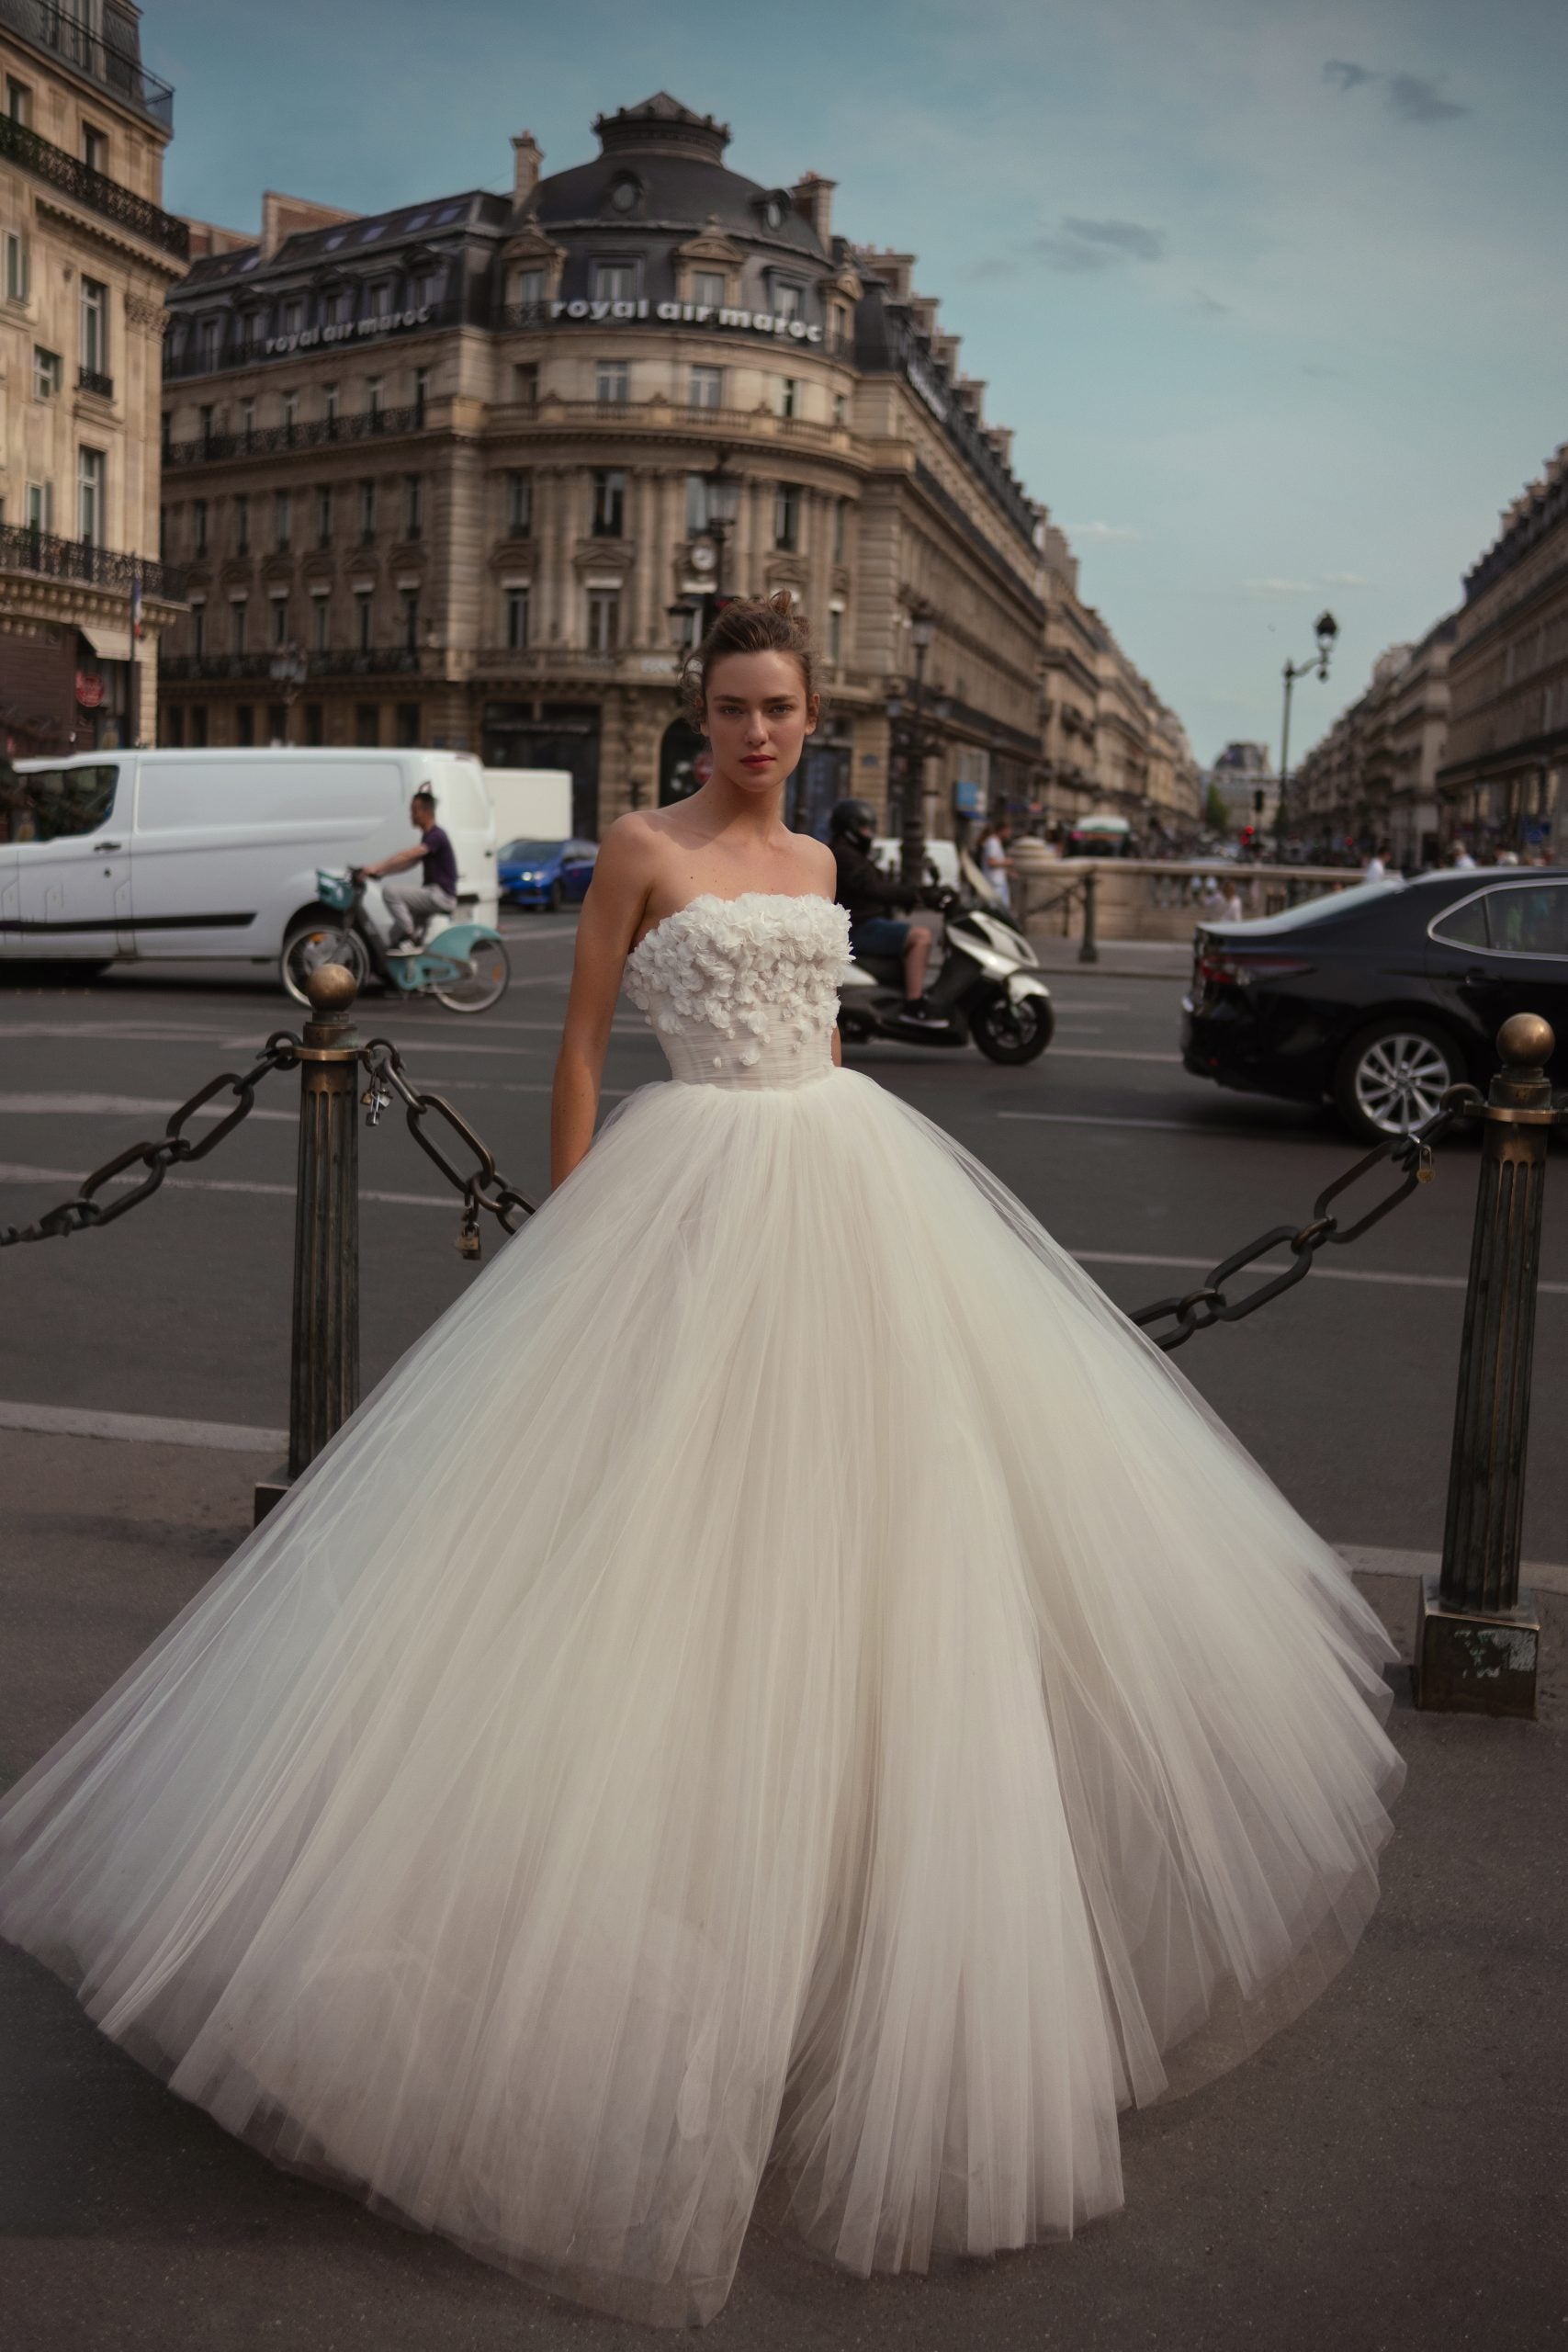 Strapless Ball Gown Wedding Dress With Tulle Skirt by Nicole + Felicia - Image 1